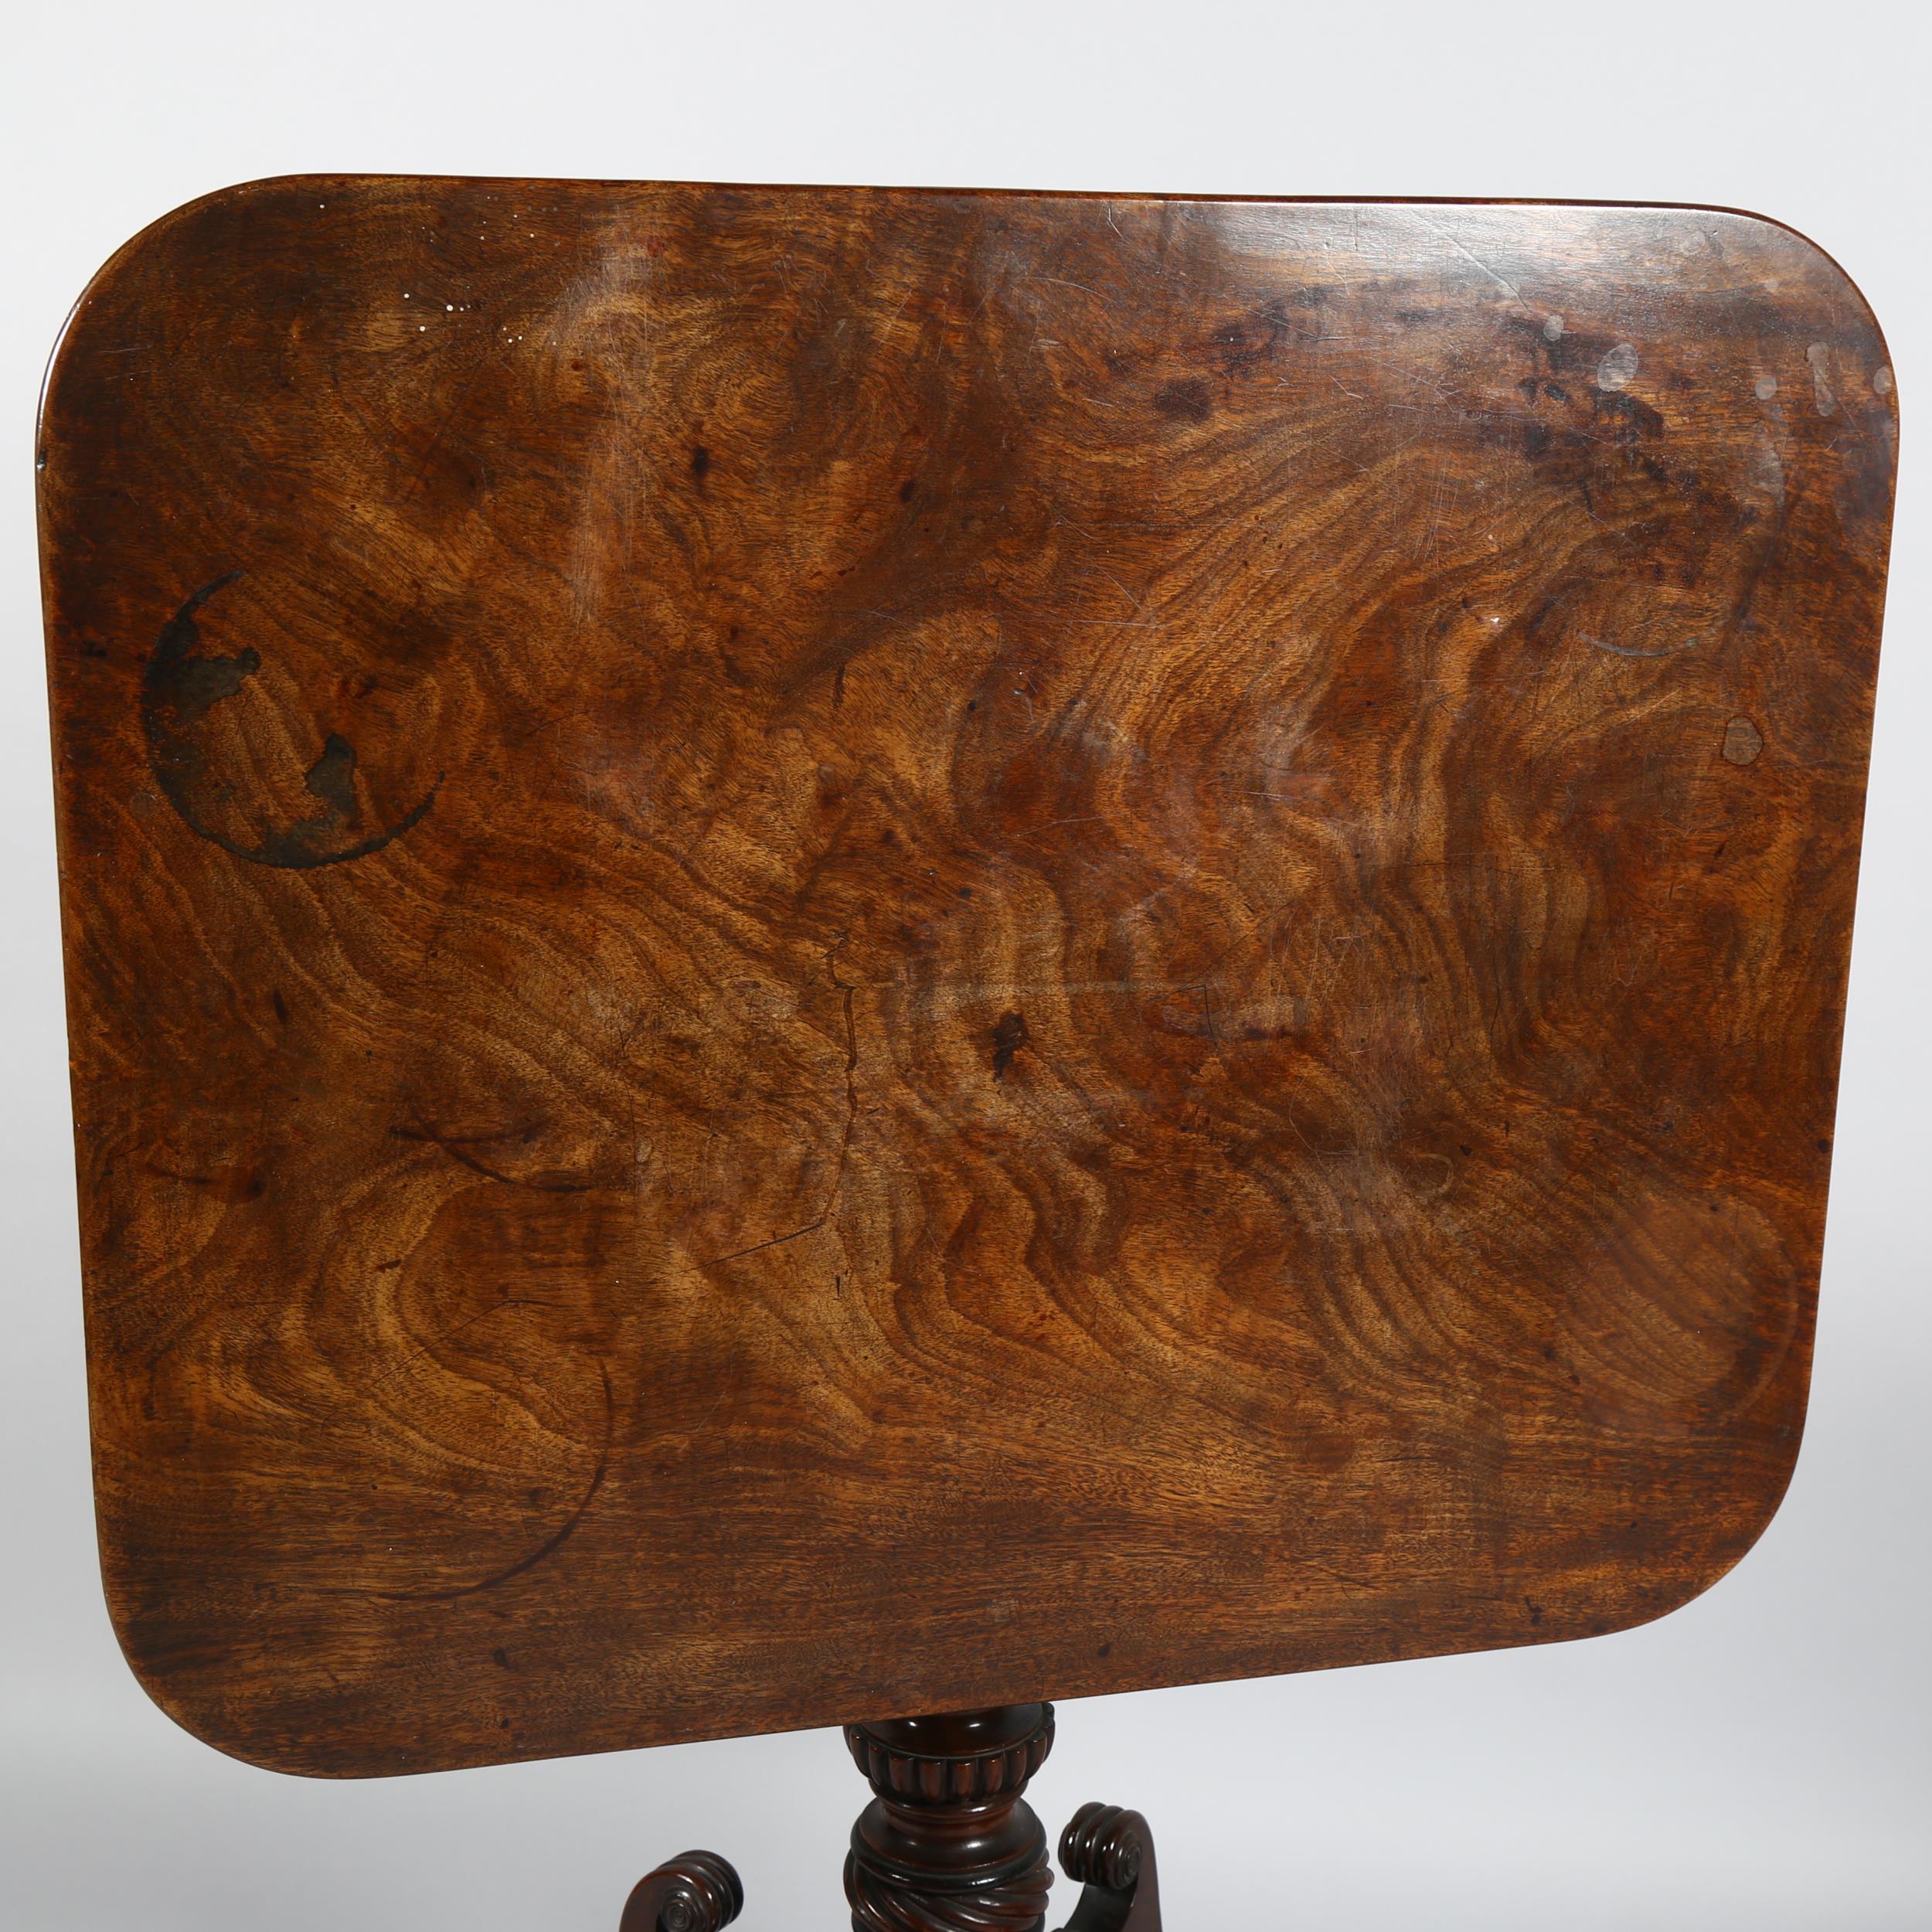 A Regency square mahogany tilt-top table, on carved quadruple base with brass casters, 74cm x 63cm - Image 2 of 5